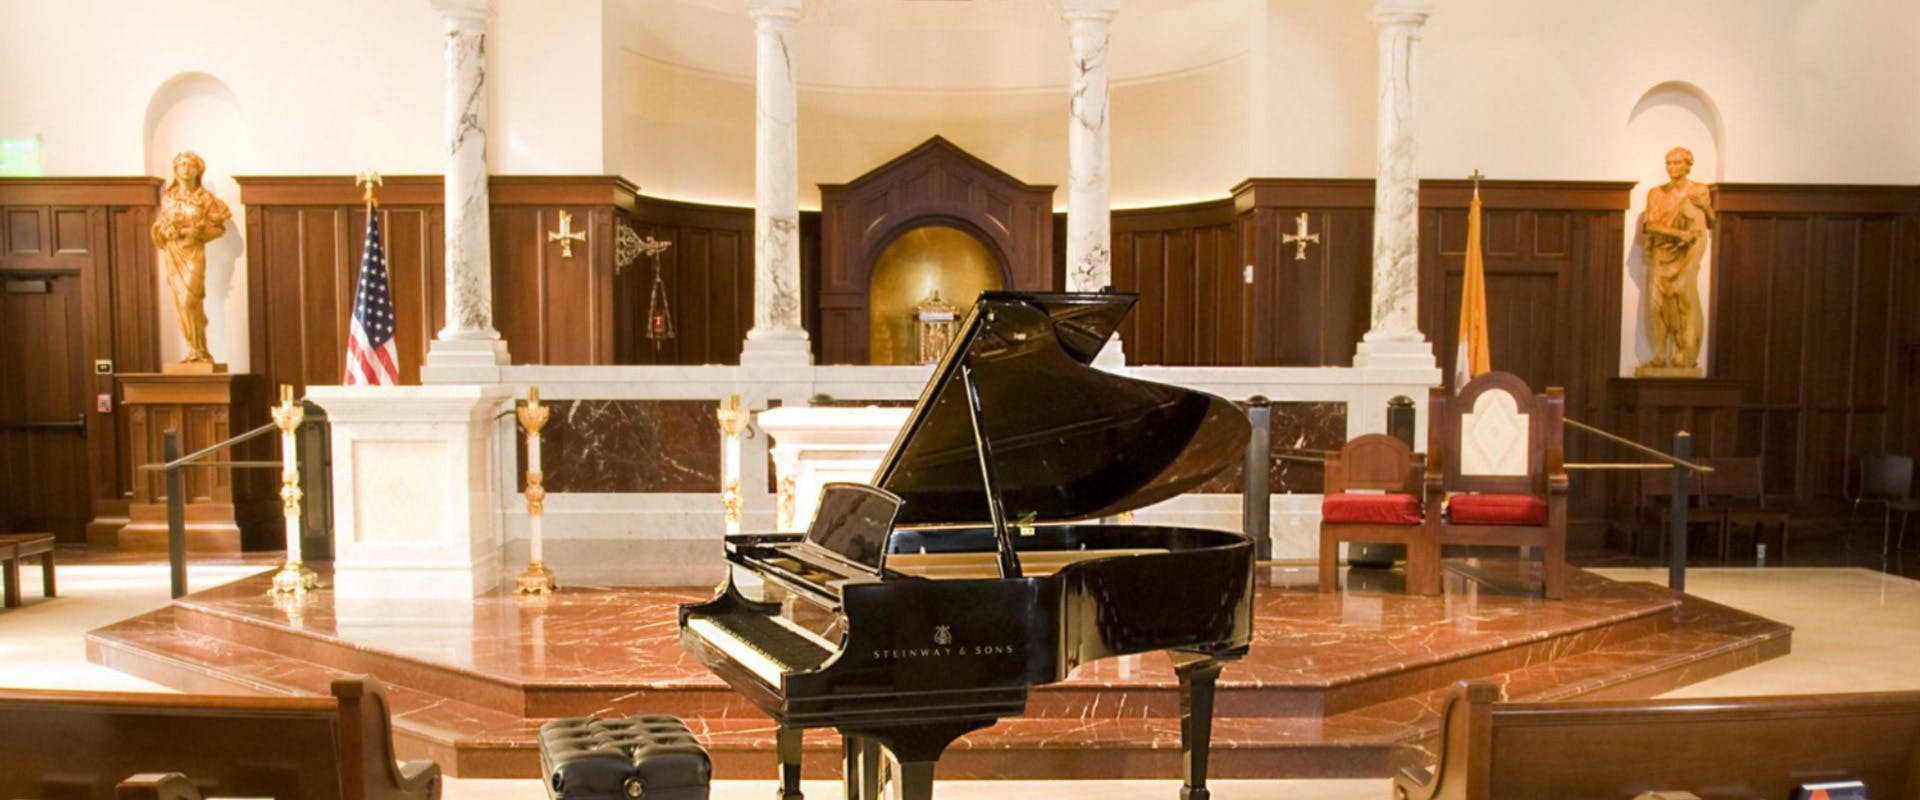 Grand piano within a house of worship